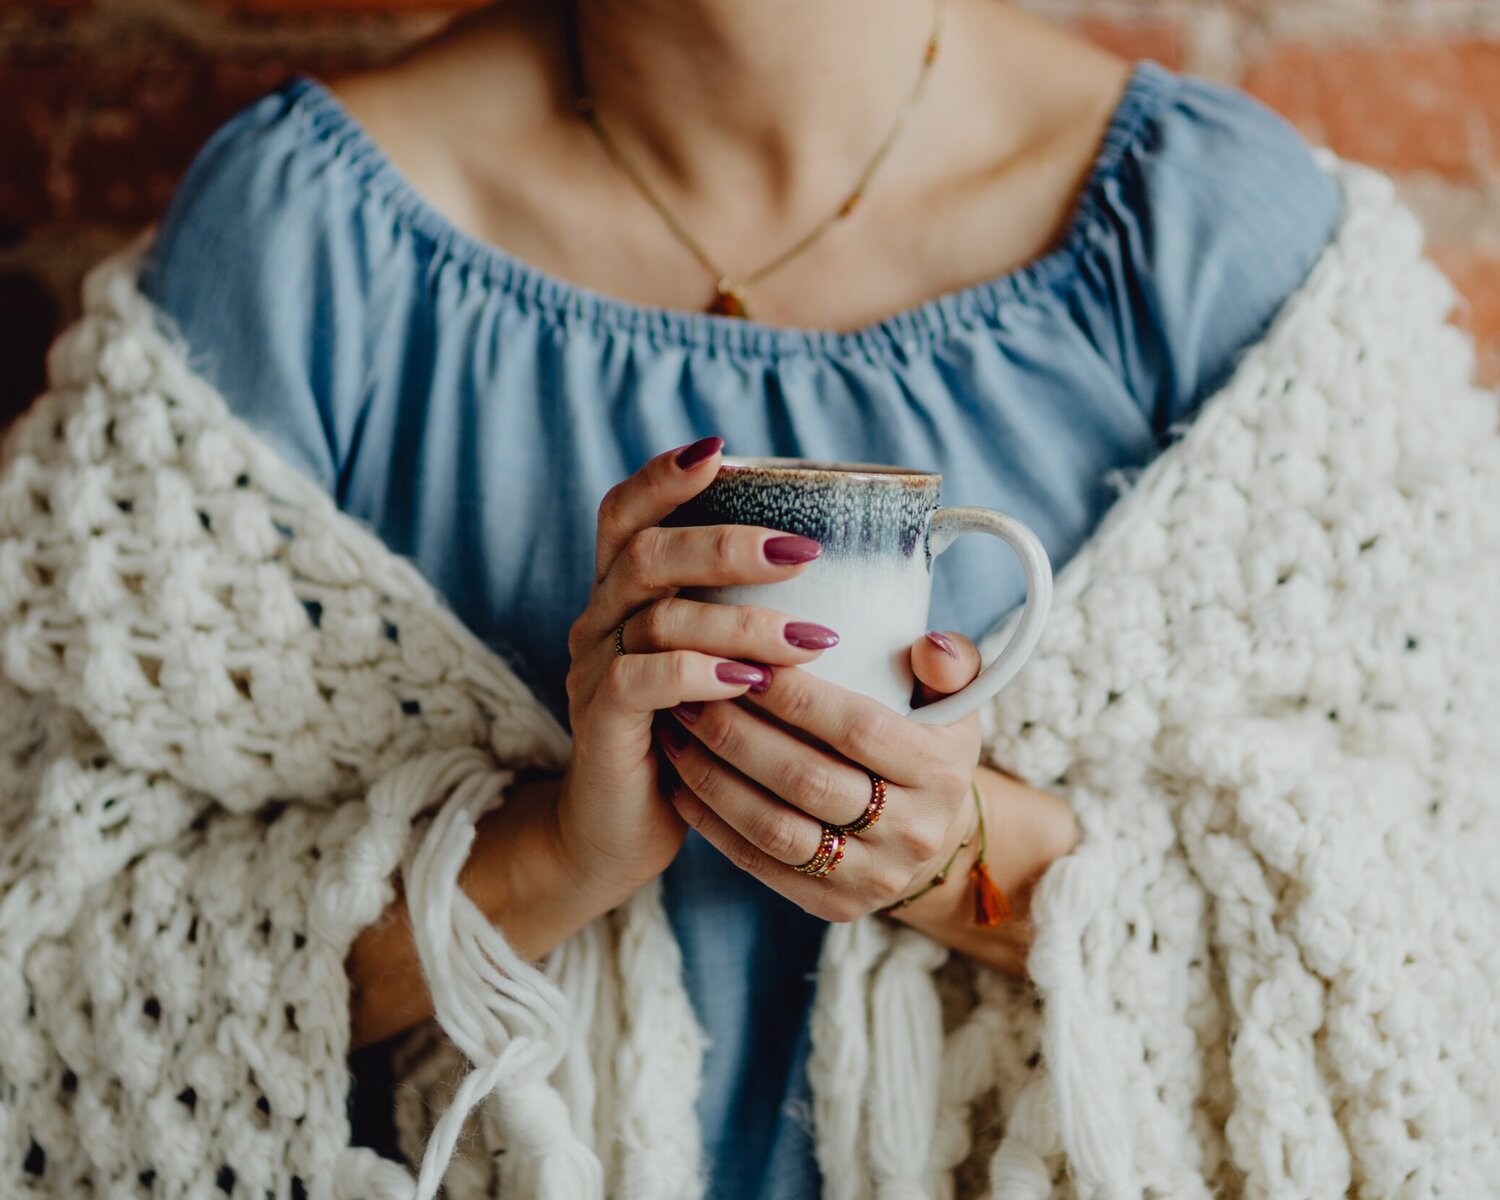 Dressing in loose layers is a smart strategy to deal with hot flashes. Watch out for caffeine and hot beverages though!